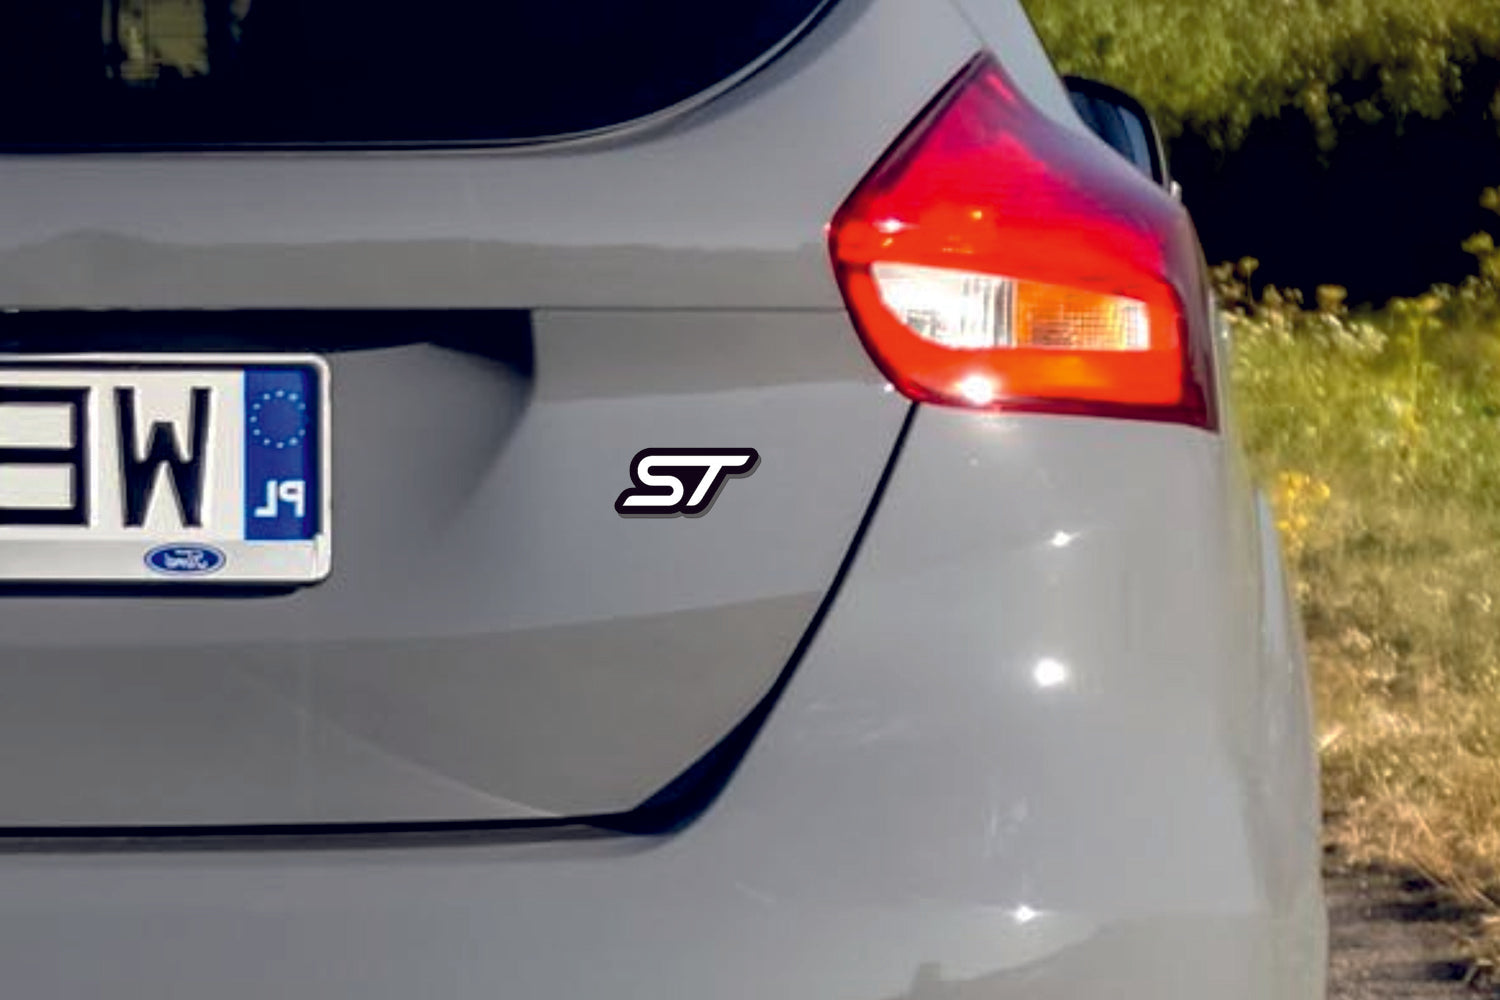 Ford tailgate trunk rear emblem with ST logo